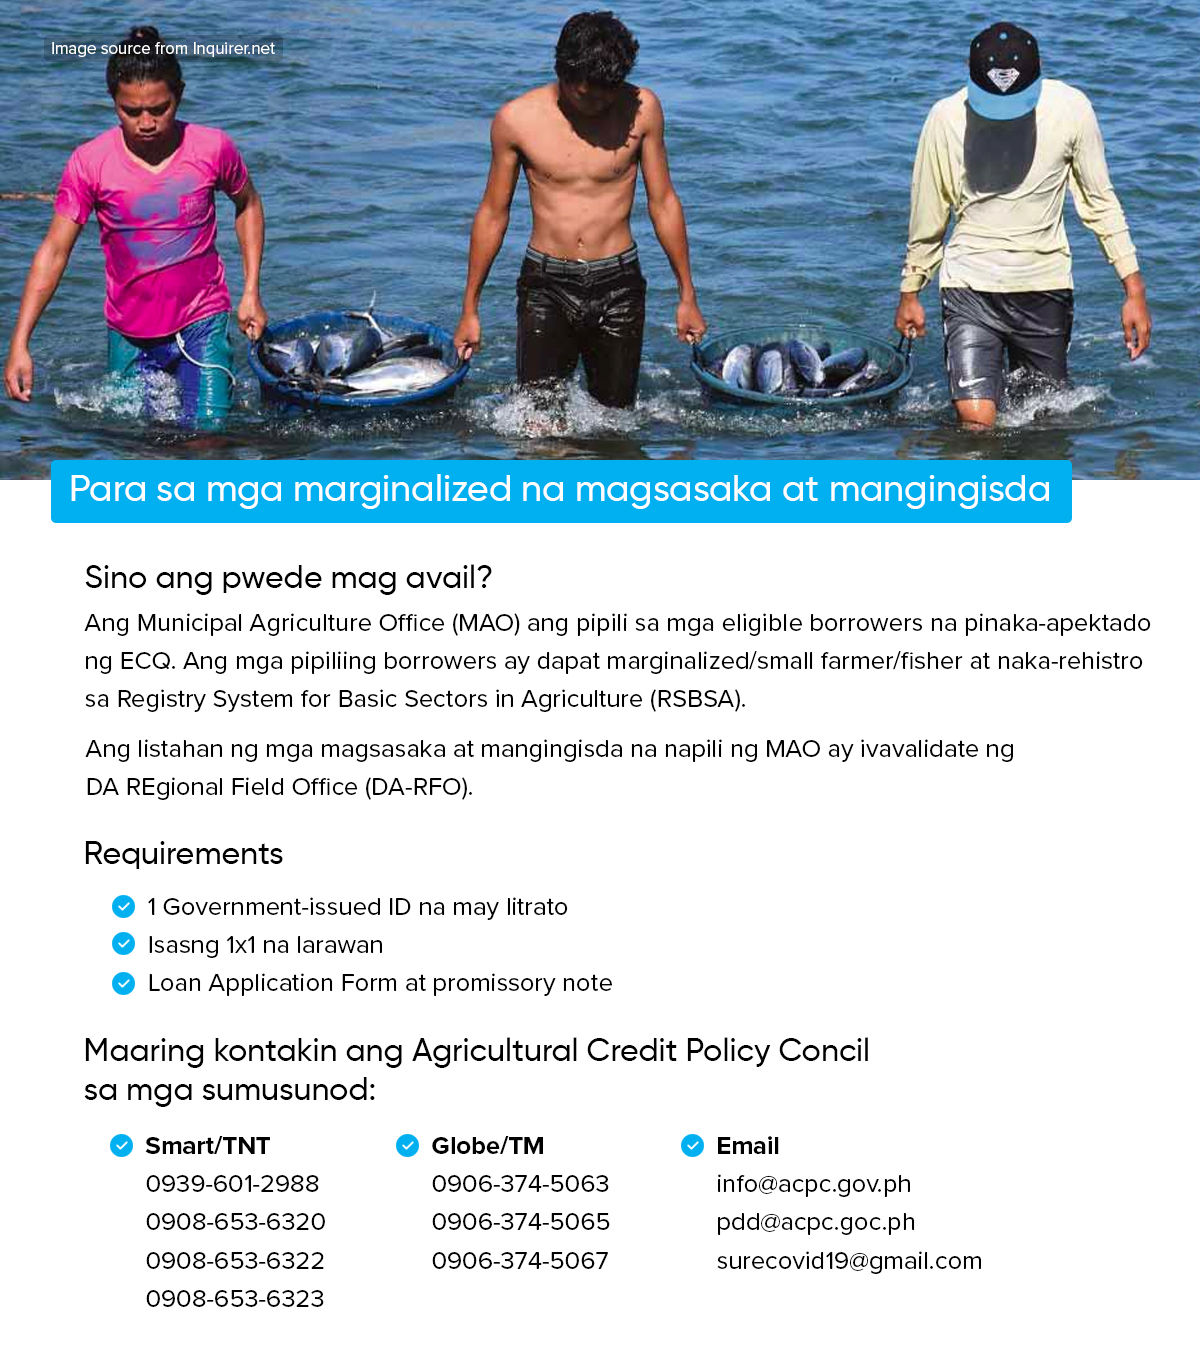 How to Apply for SURE COVID-19 Loan Program for marginalized Farmers and Fisherfolk